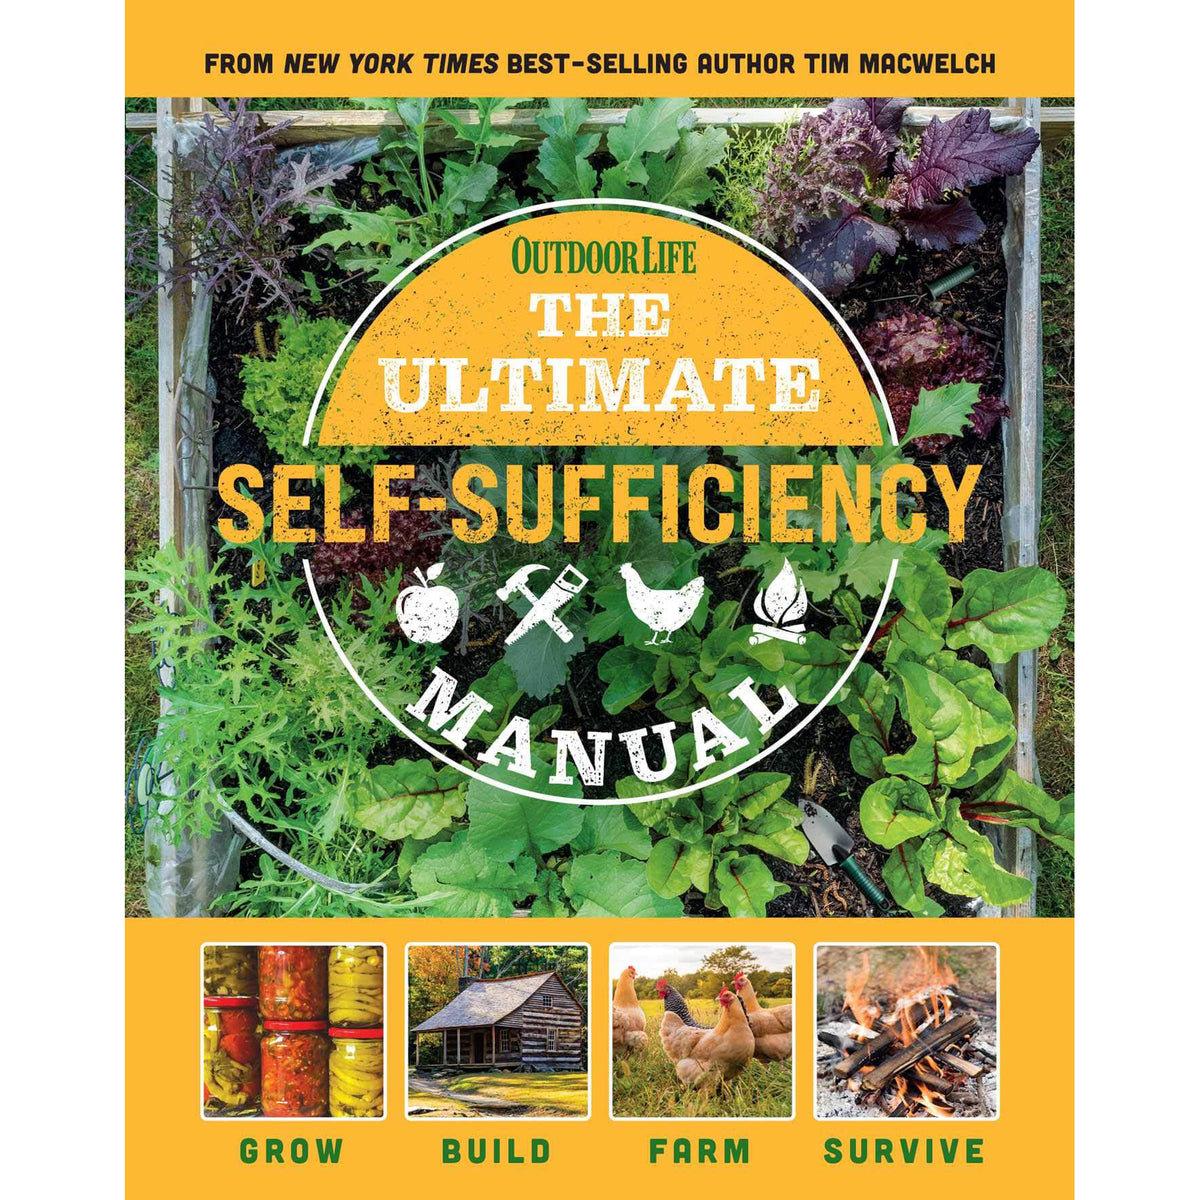 The Ultimate Self-Sufficiency Manual front cover.